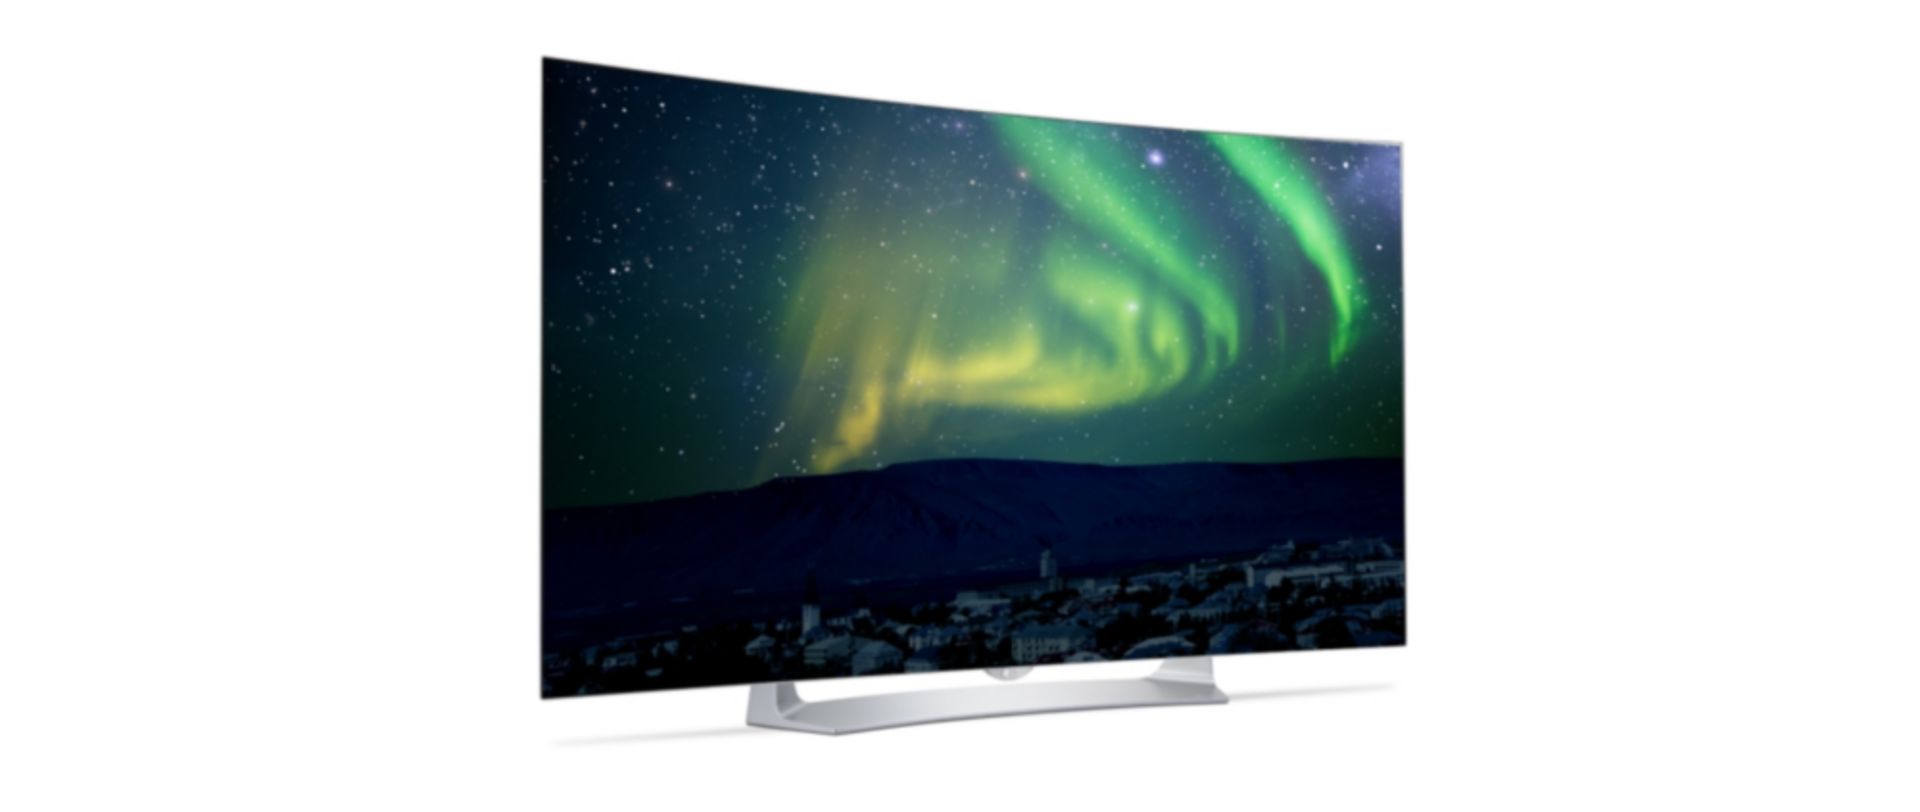 V Grade A LG 55 Inch CURVED OLED FLAT FULL HD 3D SMART TV WITH FREEVIEW HD & WEBOS 2.0 & WIFI